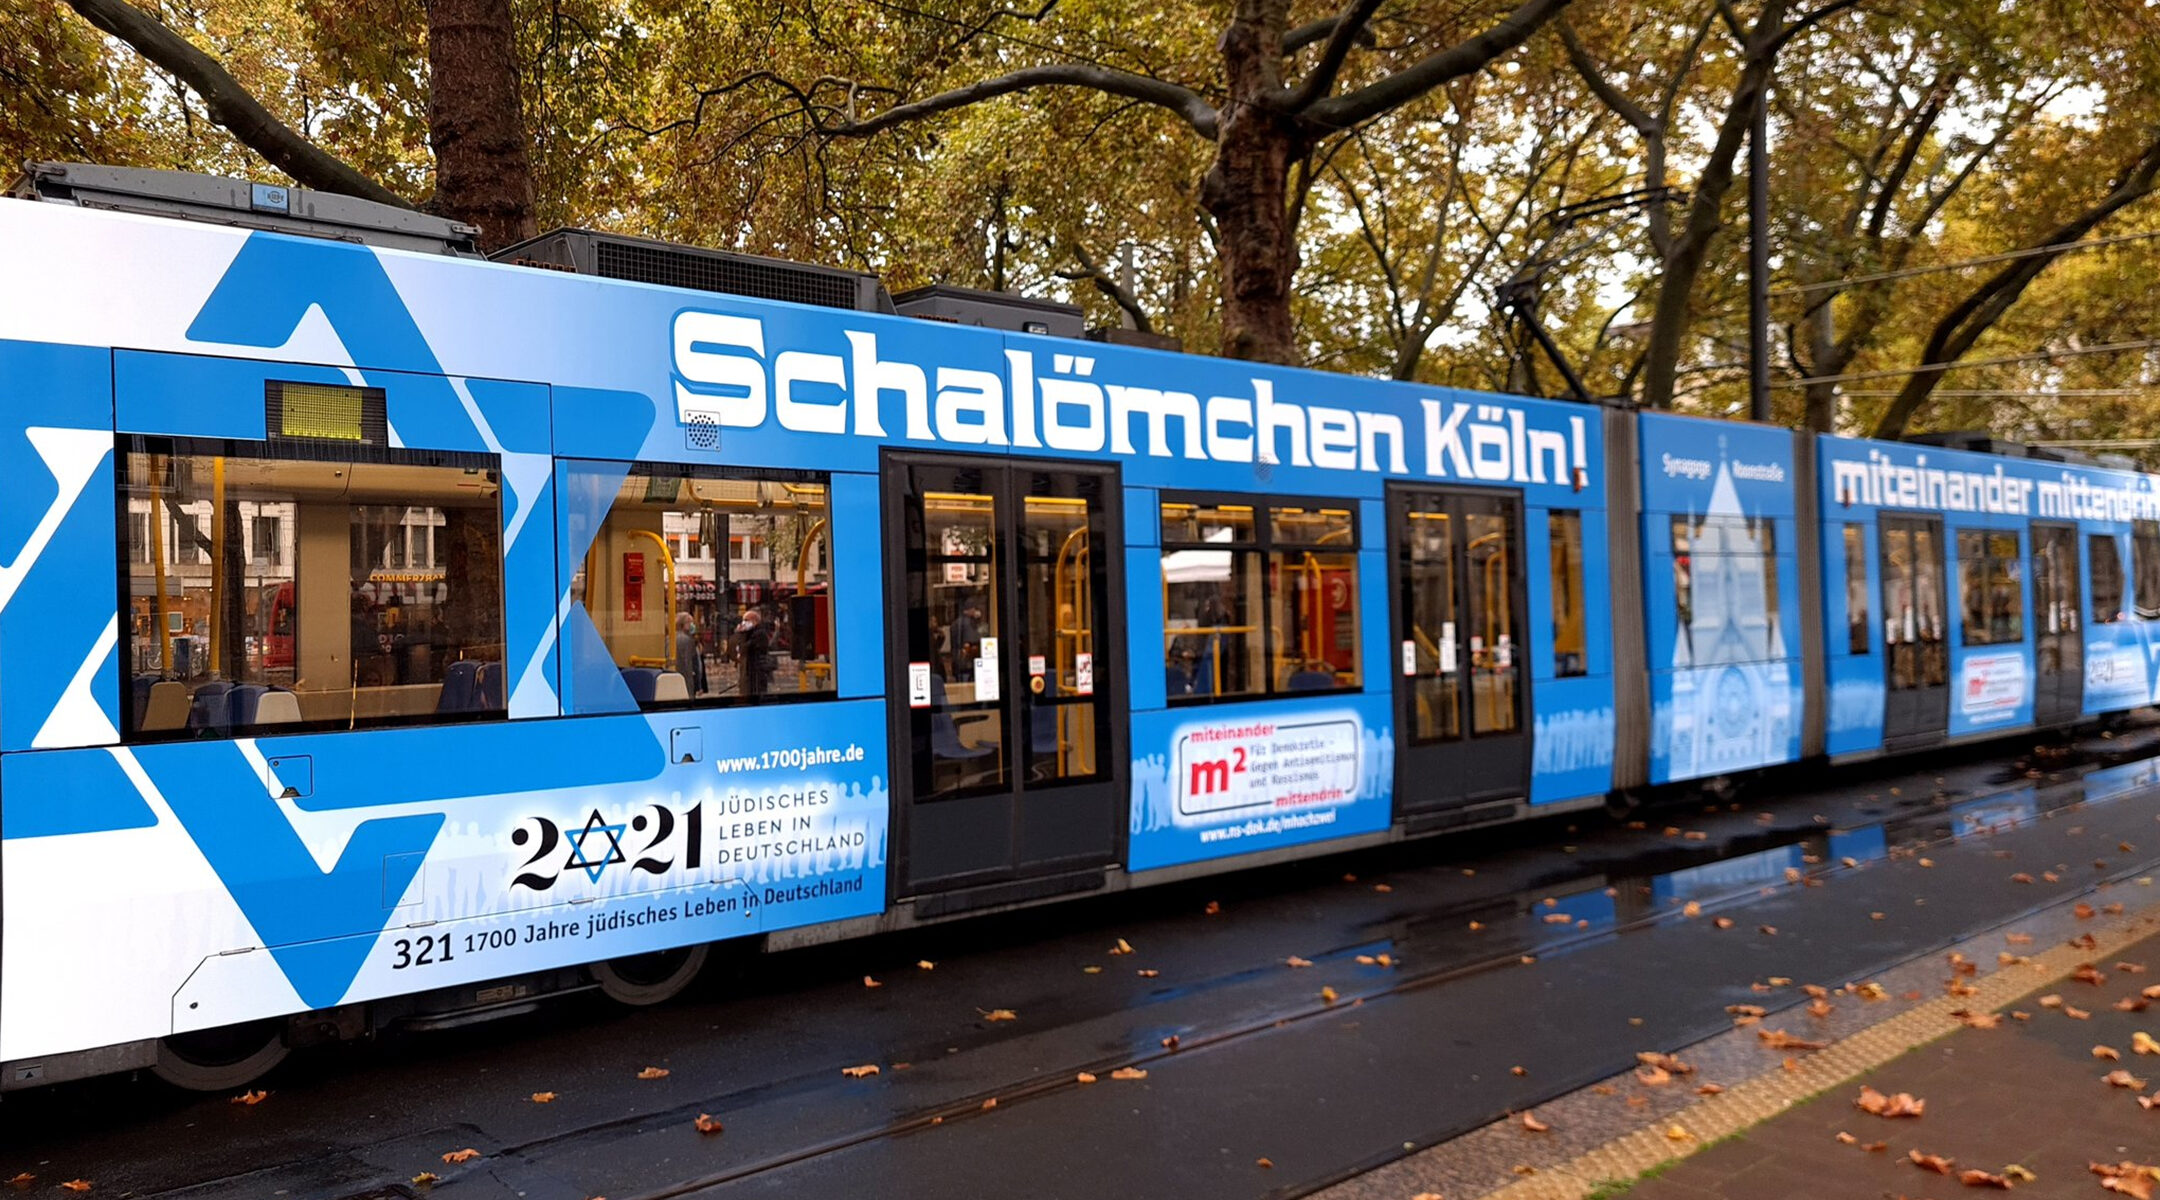 A tram featuring Star of David stickers pulls up to a halt in Cologne, Germany on Oct. 21, 2020. (Courtesy of Synagogue Community Cologne)